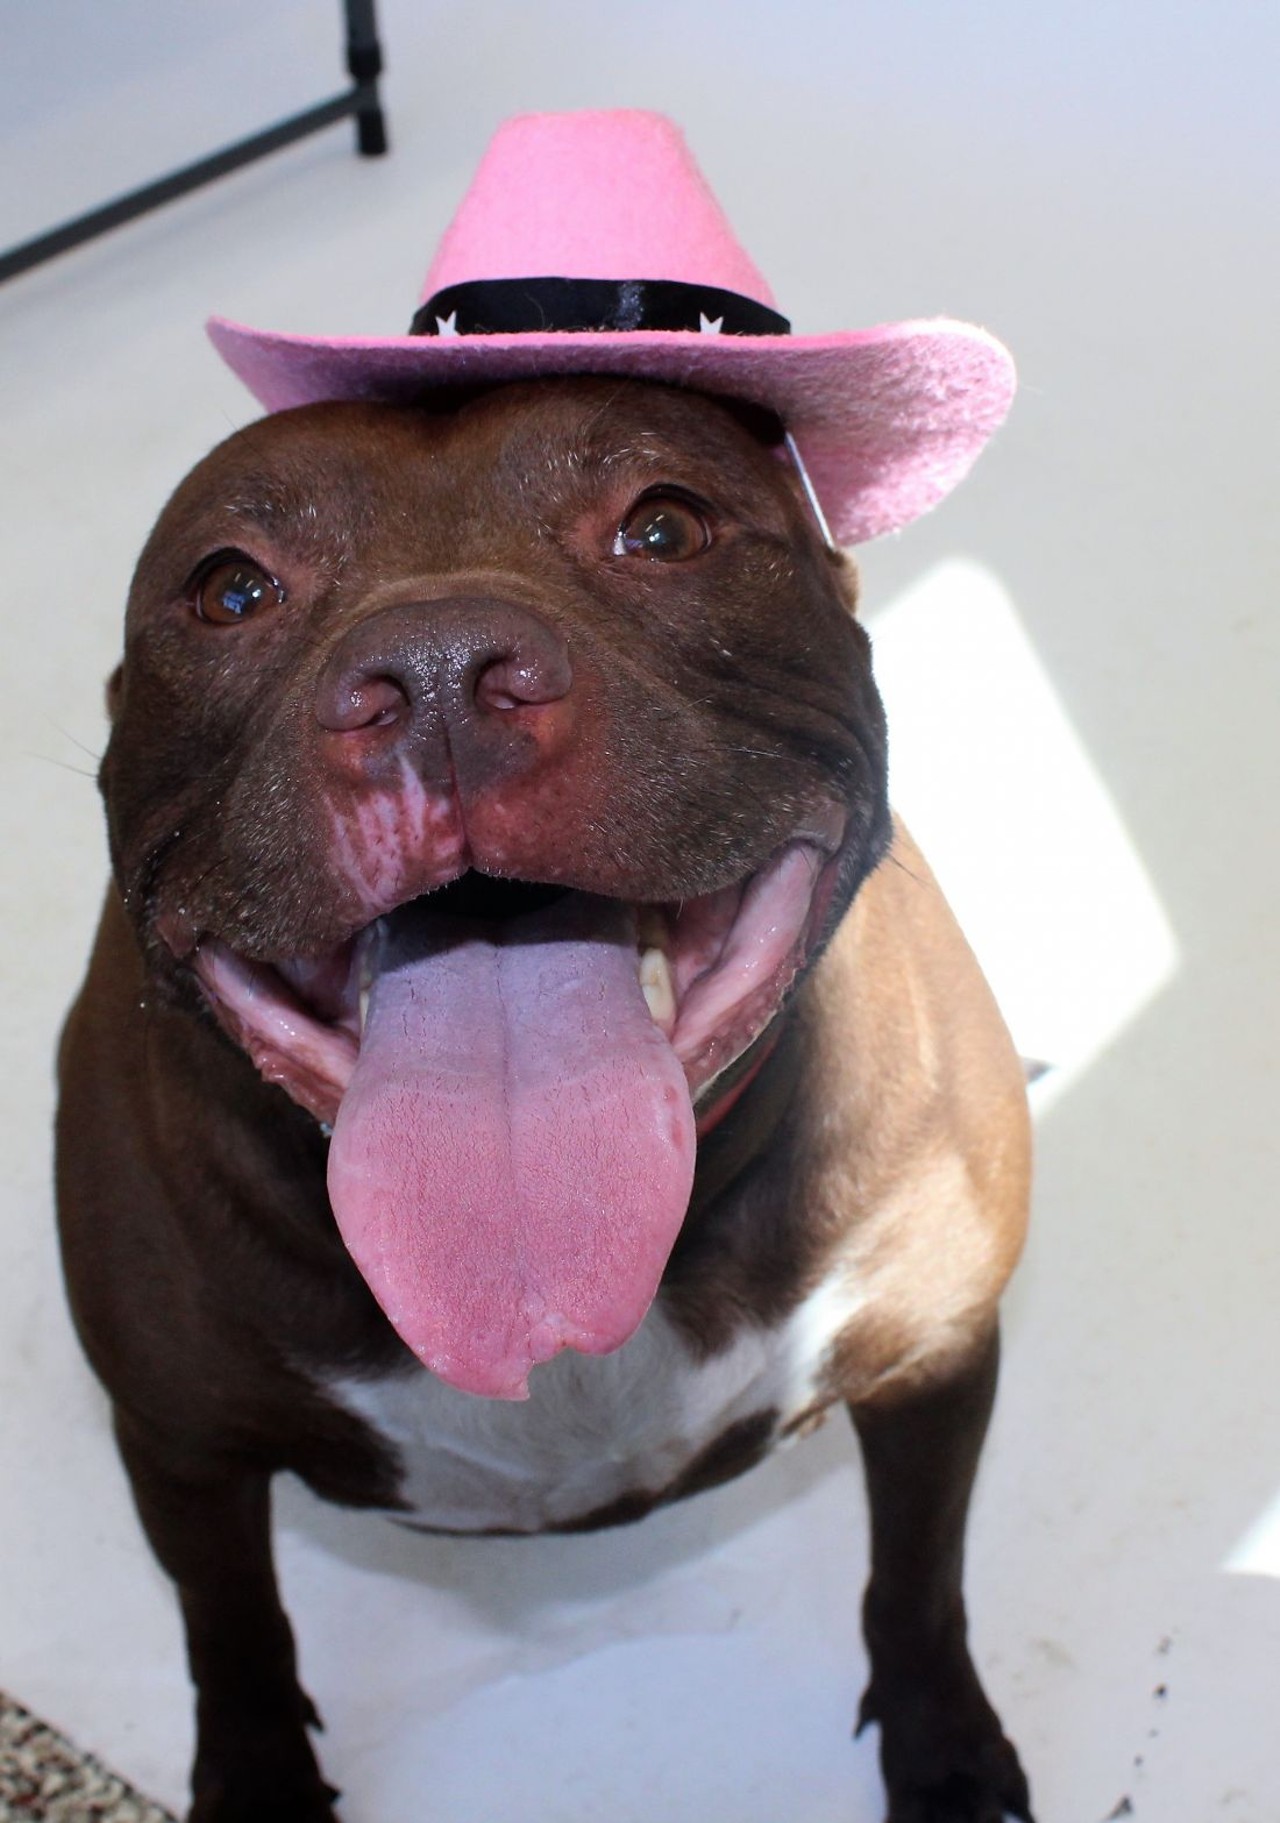 NAME: Brandy
GENDER: Female
BREED: Pit Bull
AGE: 5 years
WEIGHT: 69 pounds
SPECIAL CONSIDERATIONS: None
REASON I CAME TO MHS: Owner surrender
LOCATION: Mackey Center for Animal Care in Detroit
ID NUMBER: 869350